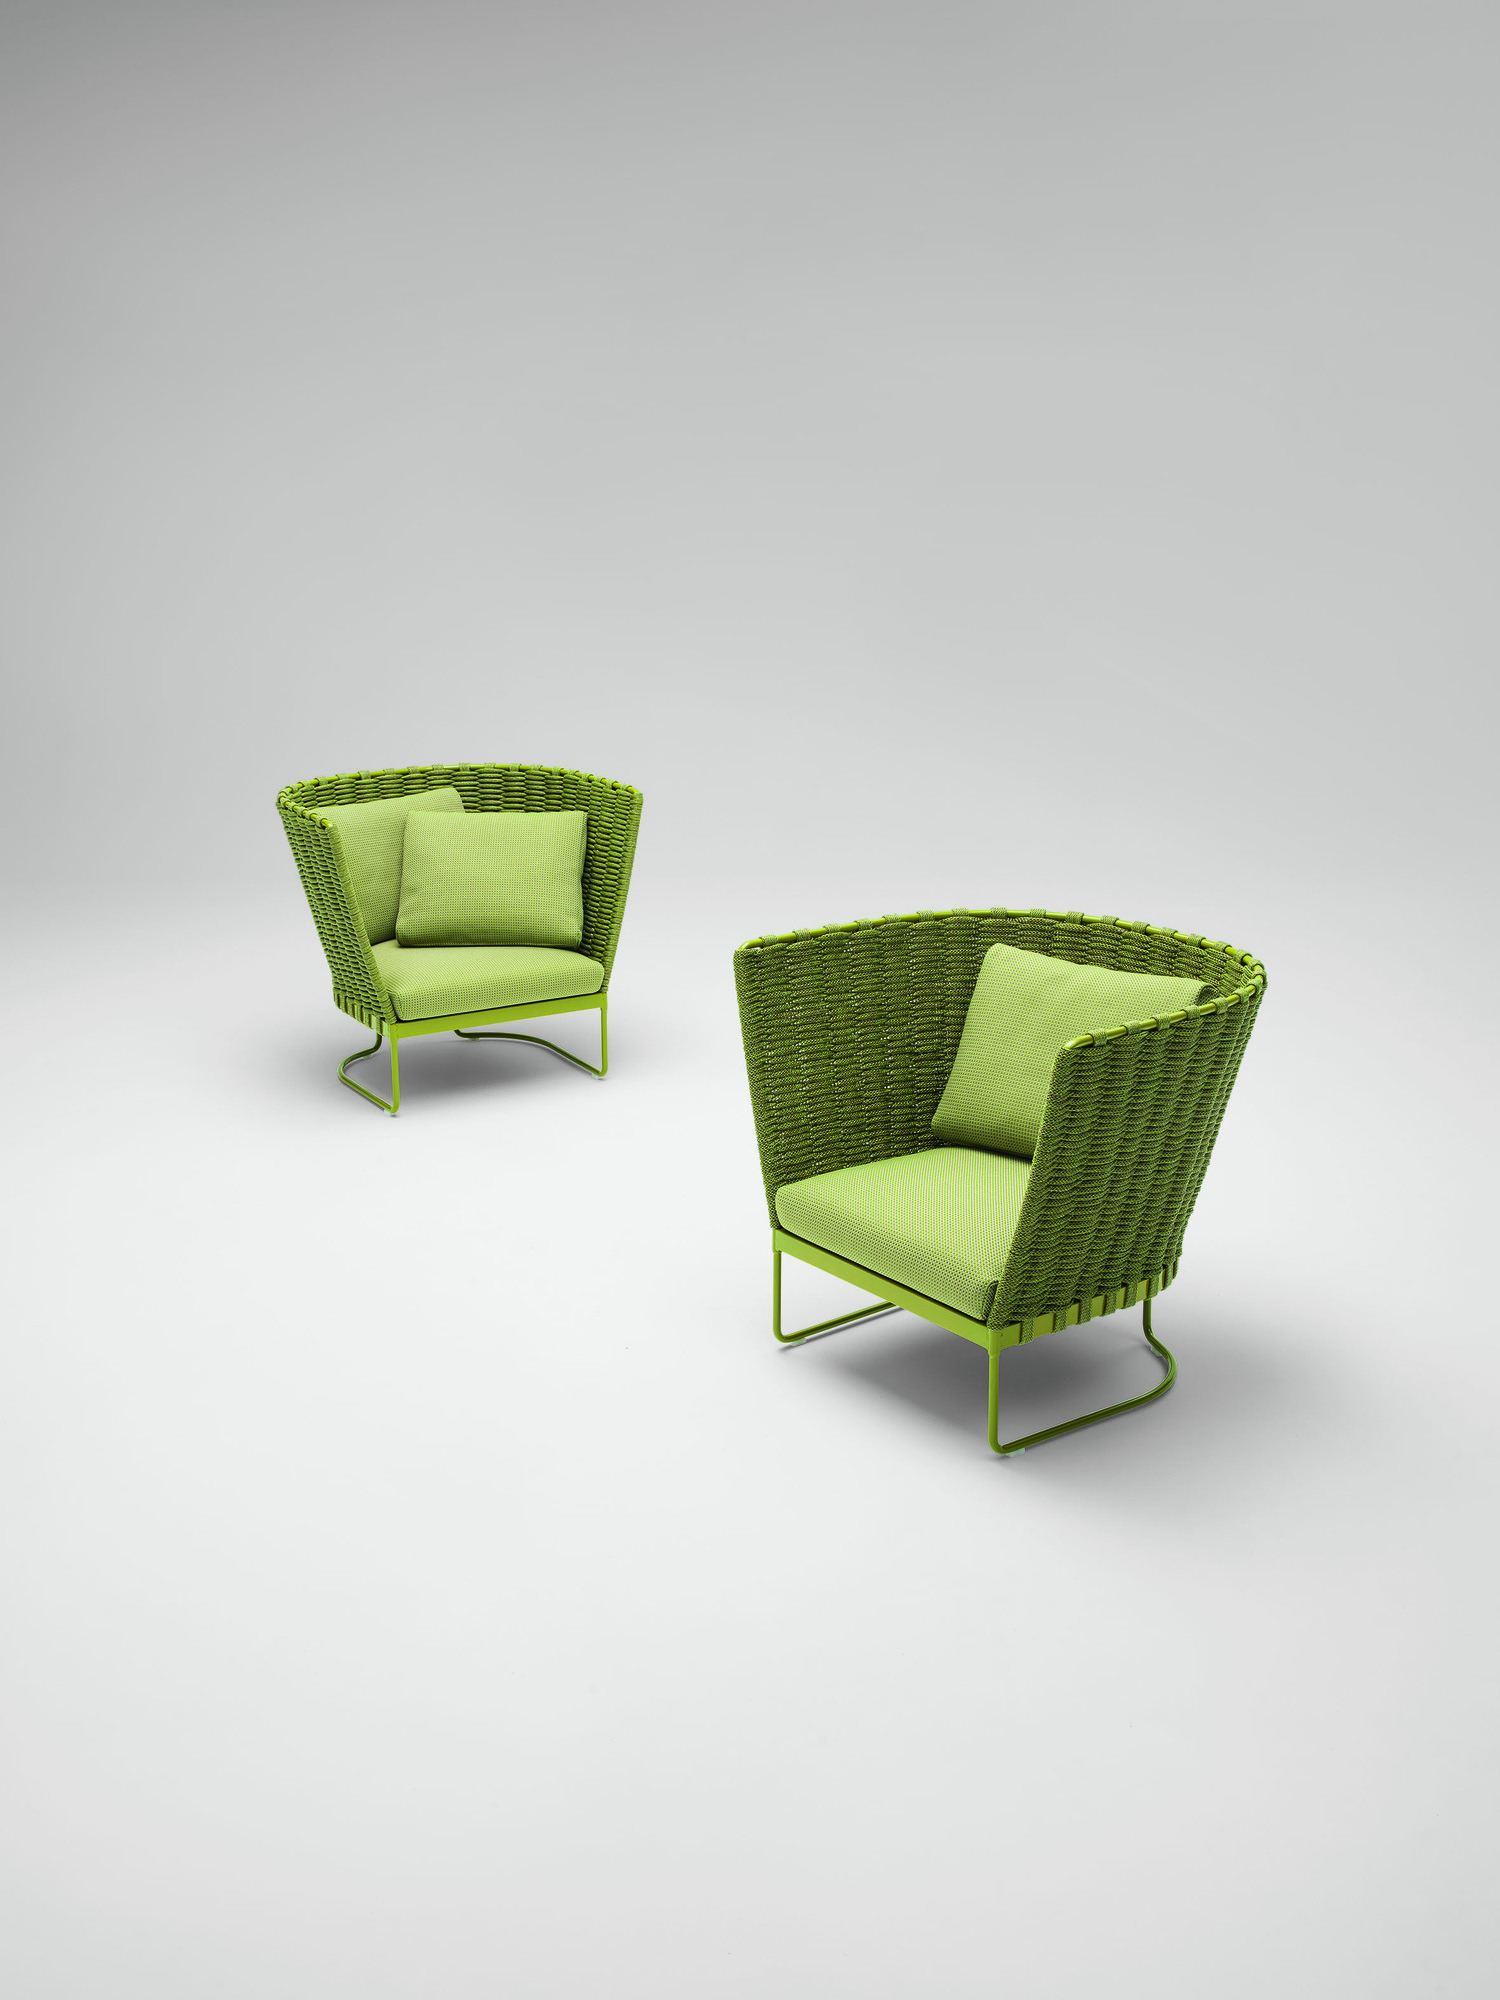 The Ami series includes chairs, armchairs and sofas, available in both the outdoor and the indoor versions. The structure is made of stainless steel and is hand woven with many kinds of Paola Lenti’s signature materials, from technical cords to tubular knits. The base features a satin finish or a matte or gloss varnishing. The seat cushion is fixed or removable depending on the item: it is made of Aerelle blue polyester fiber and stress-resistant polyurethane. The upholstery cover is available in all the outdoor and indoor fabrics in the collection. © PAOLA LENTI SRL/SERGIO CHIMENTI